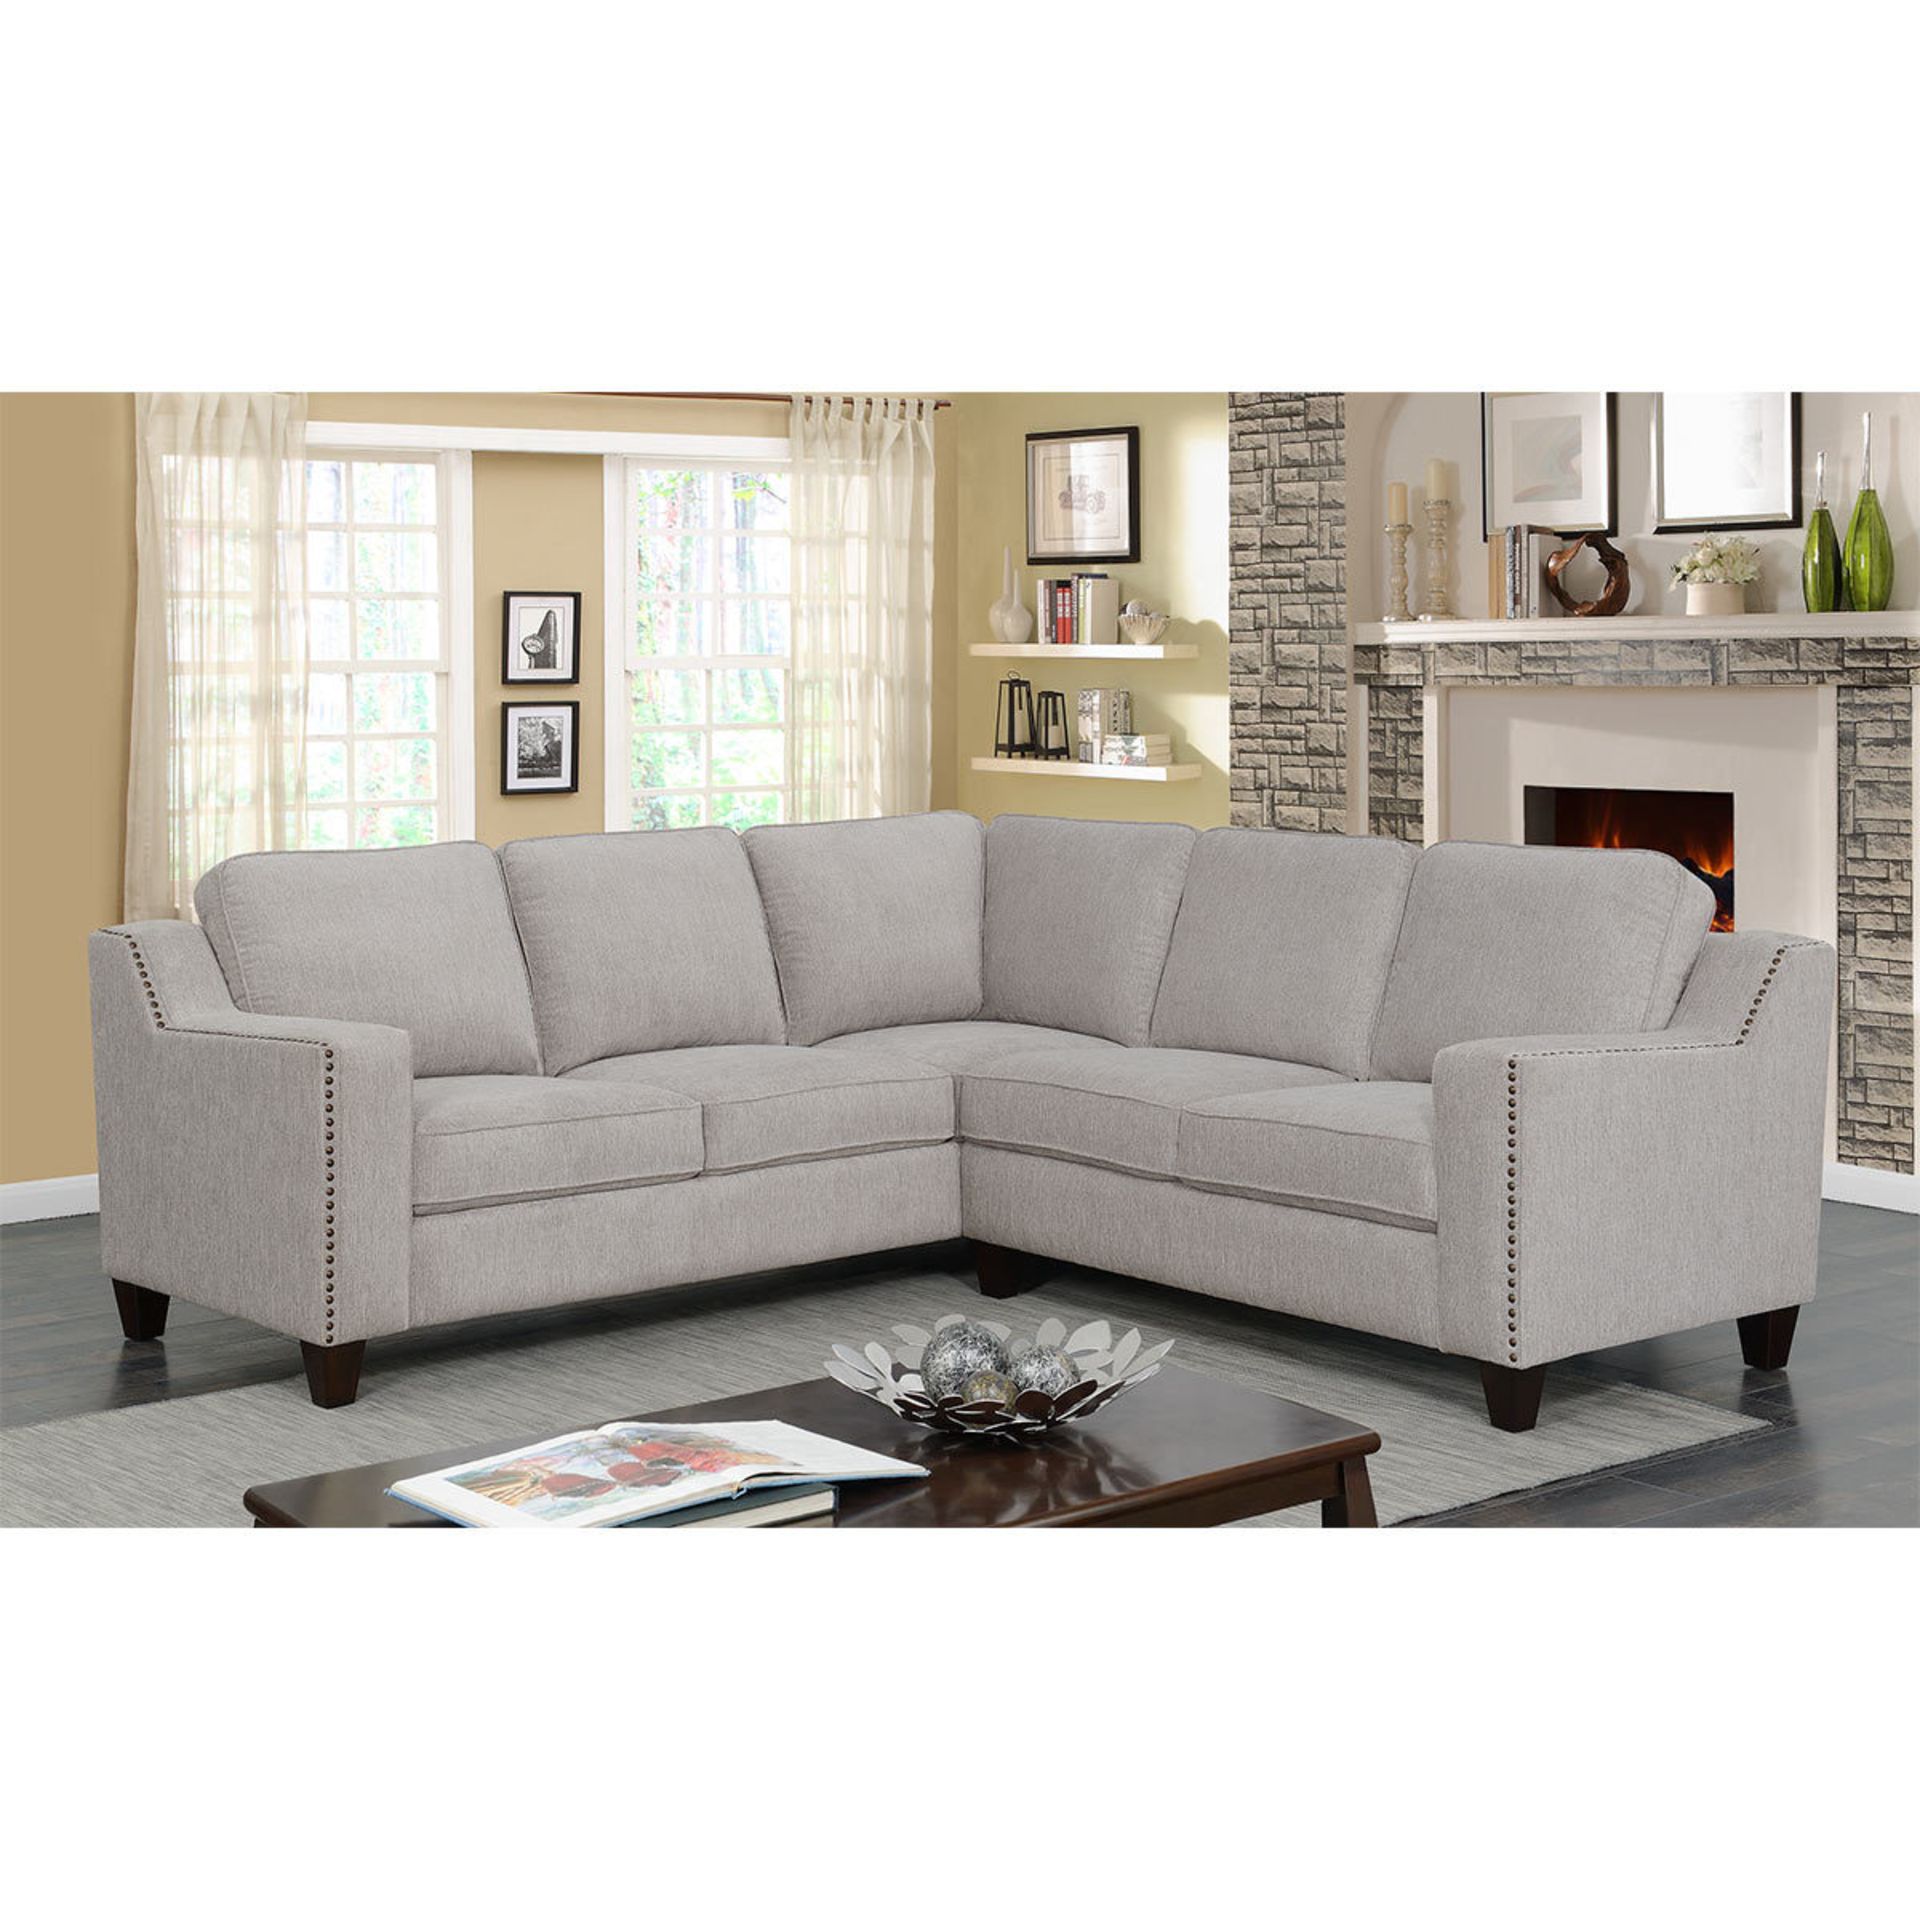 1 BOXED MSTAR INTERNATIONAL MADDOX FABRIC SECTIONAL SOFA RRP Â£899 (2 BOXES)